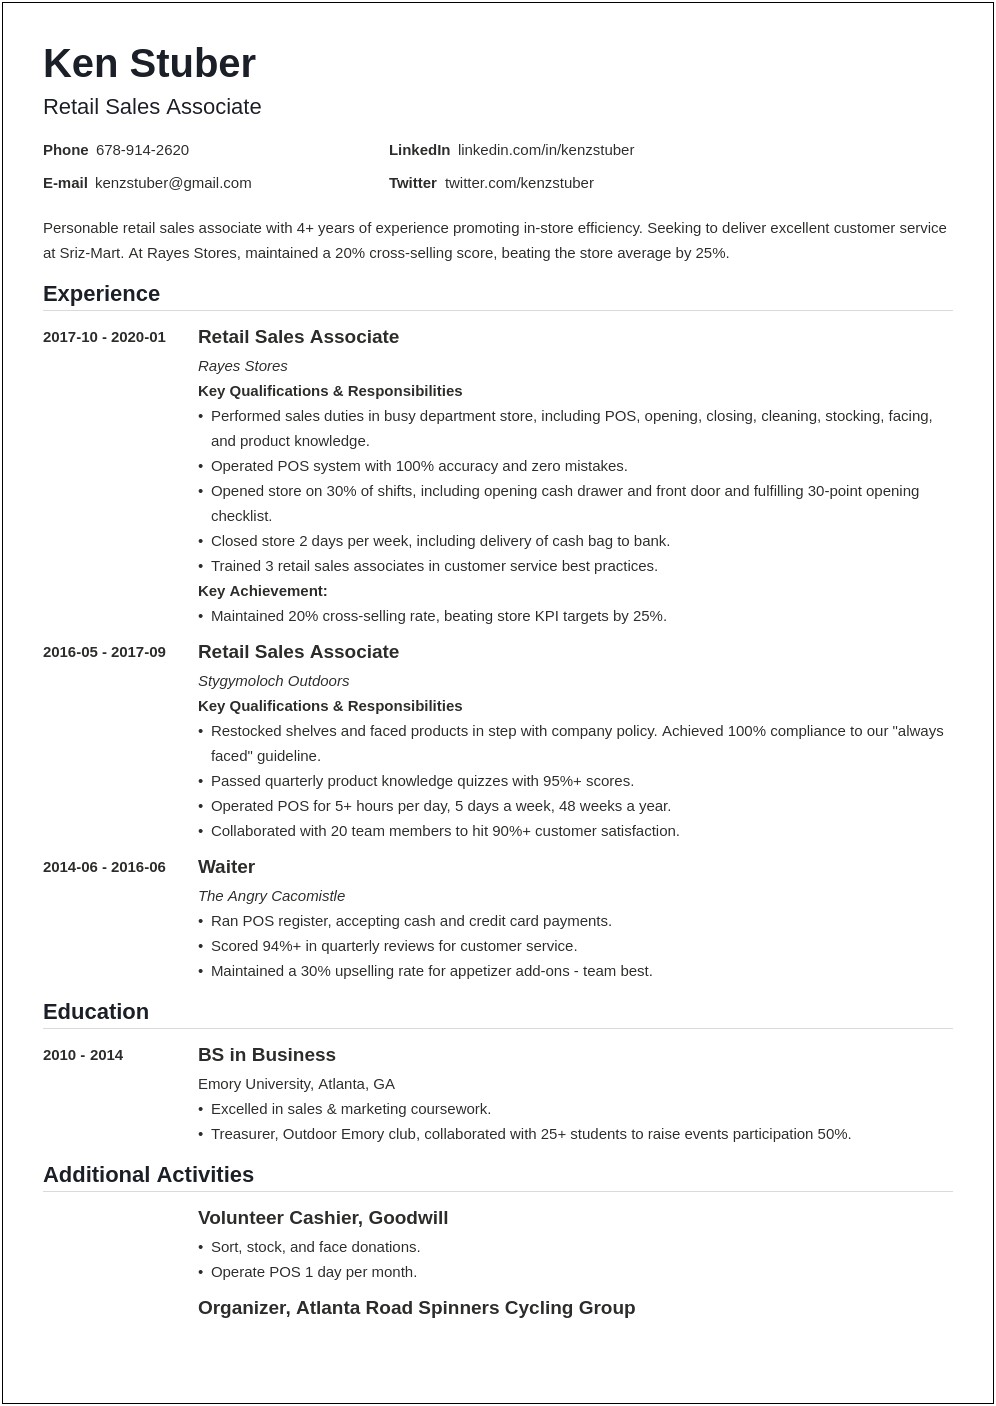 Cell Phone Sales Objective On Resume